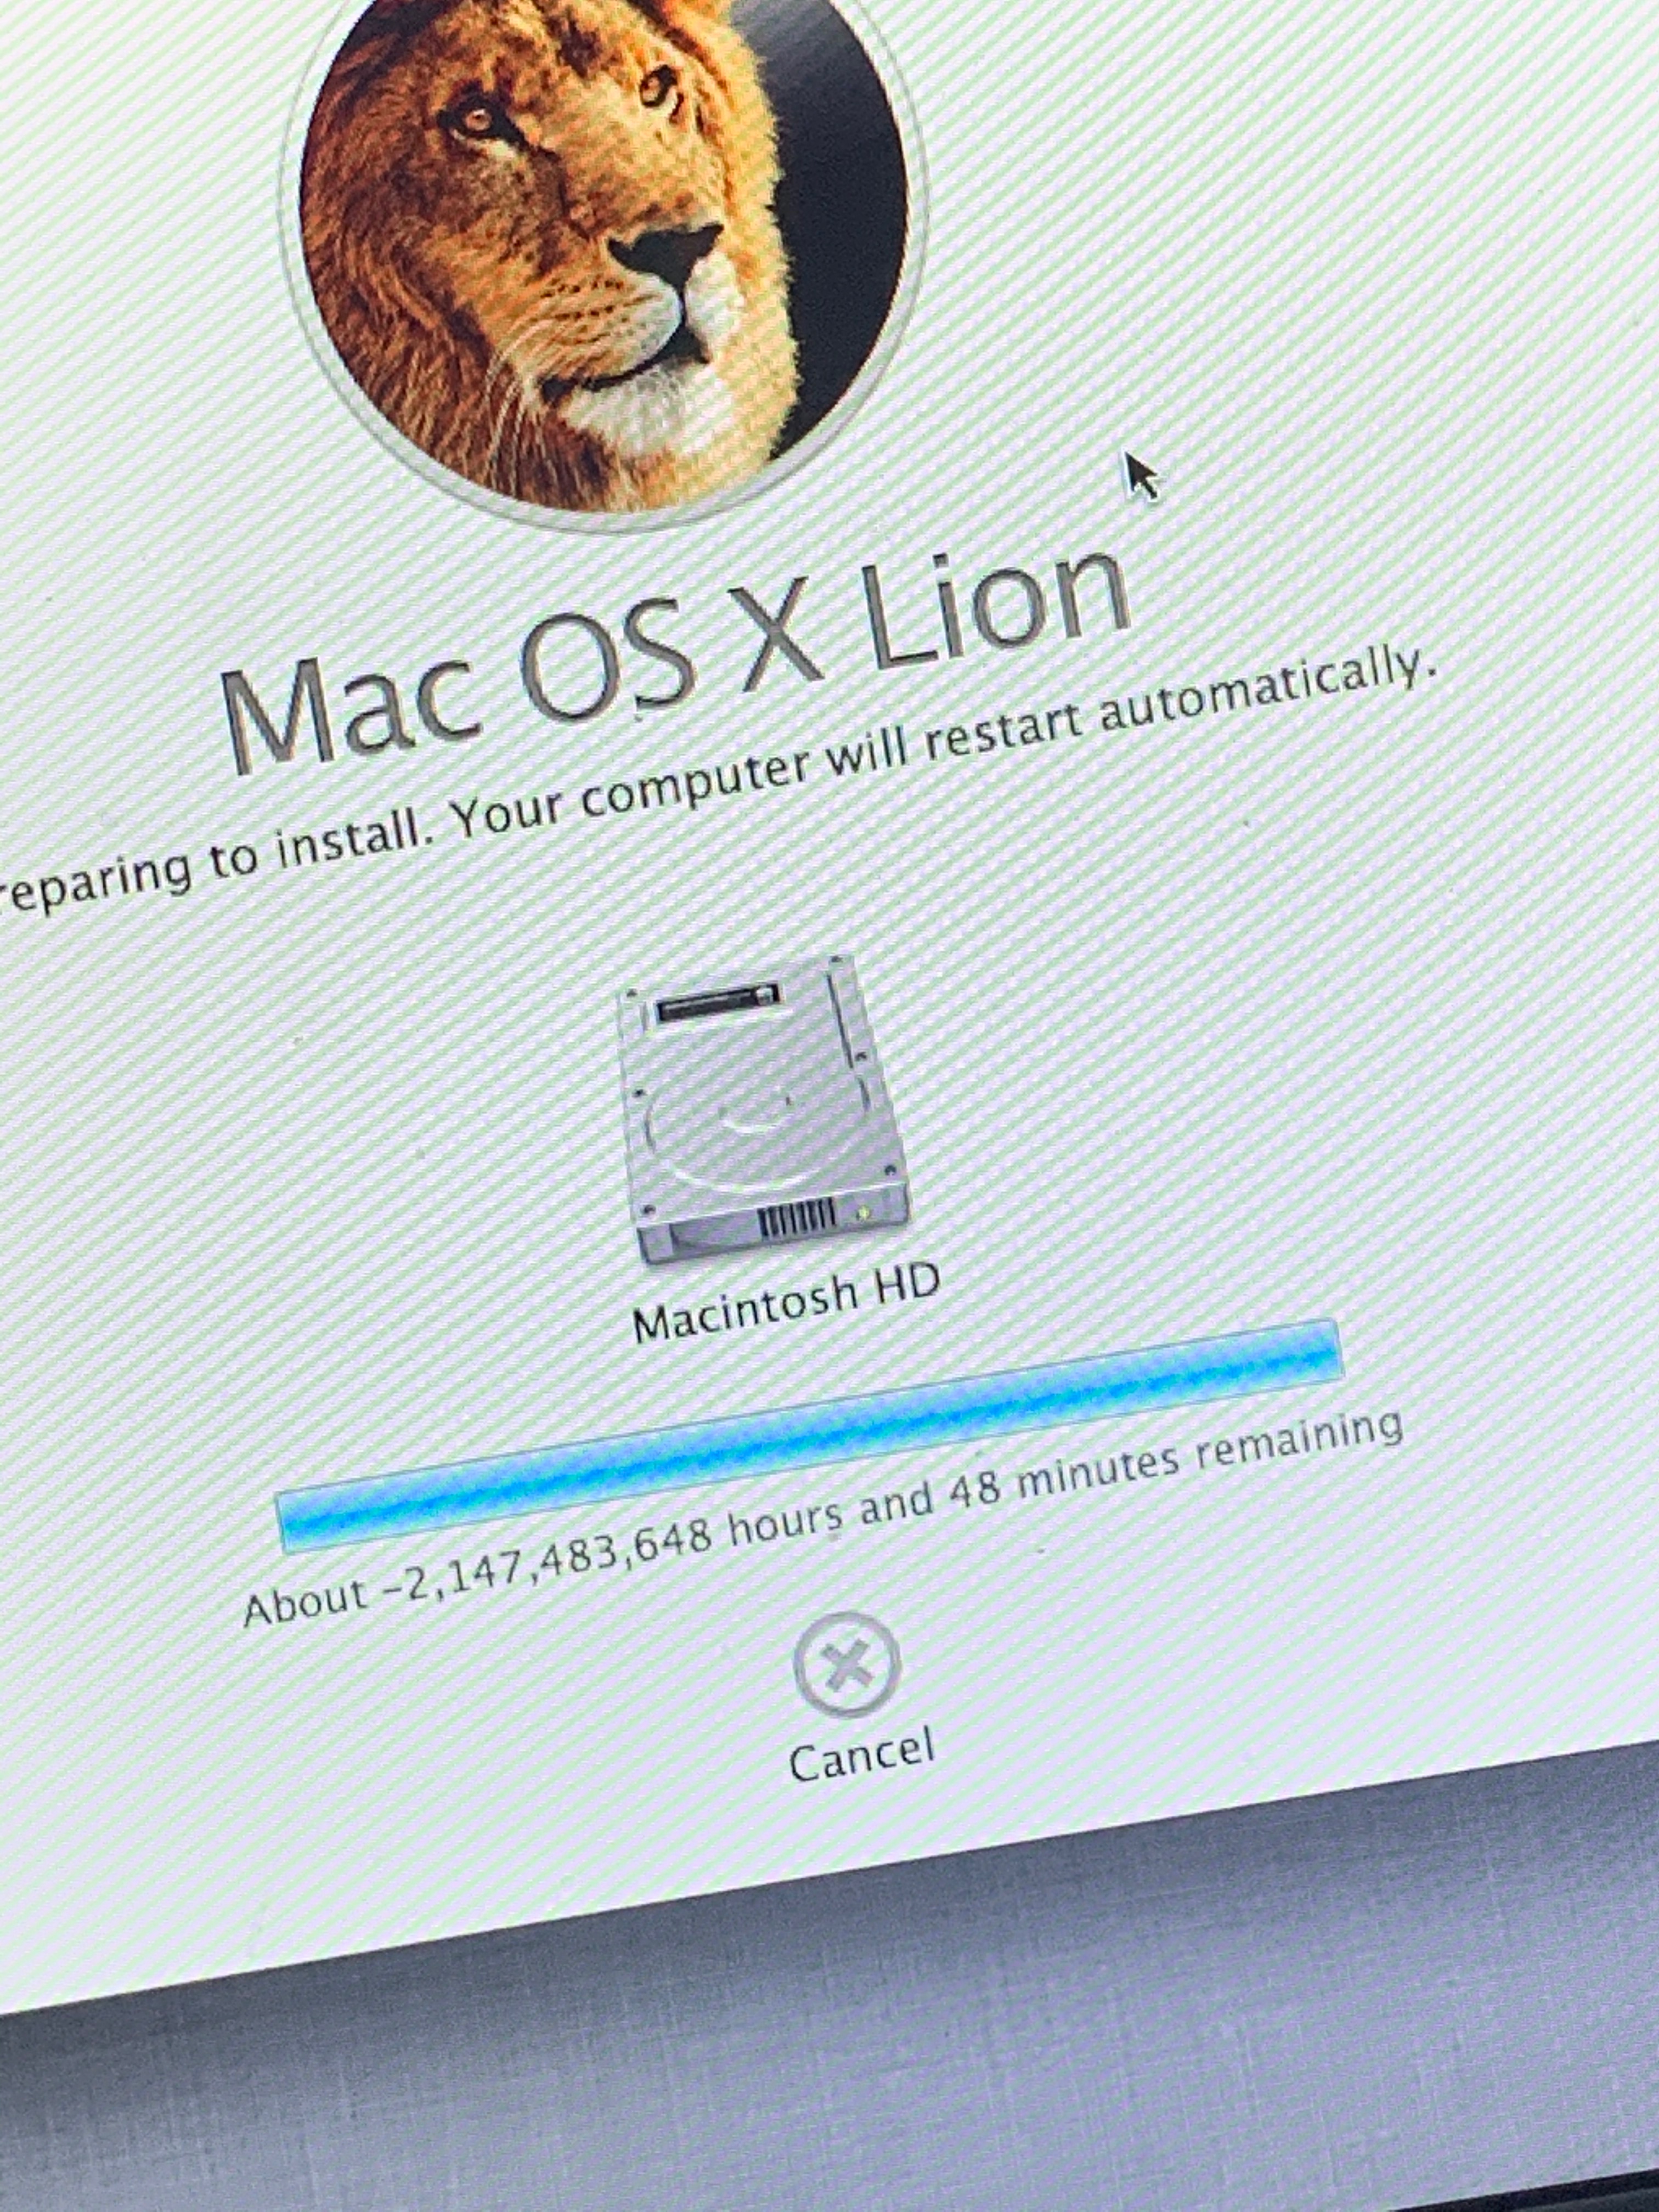 mac os x lion cant download additional components